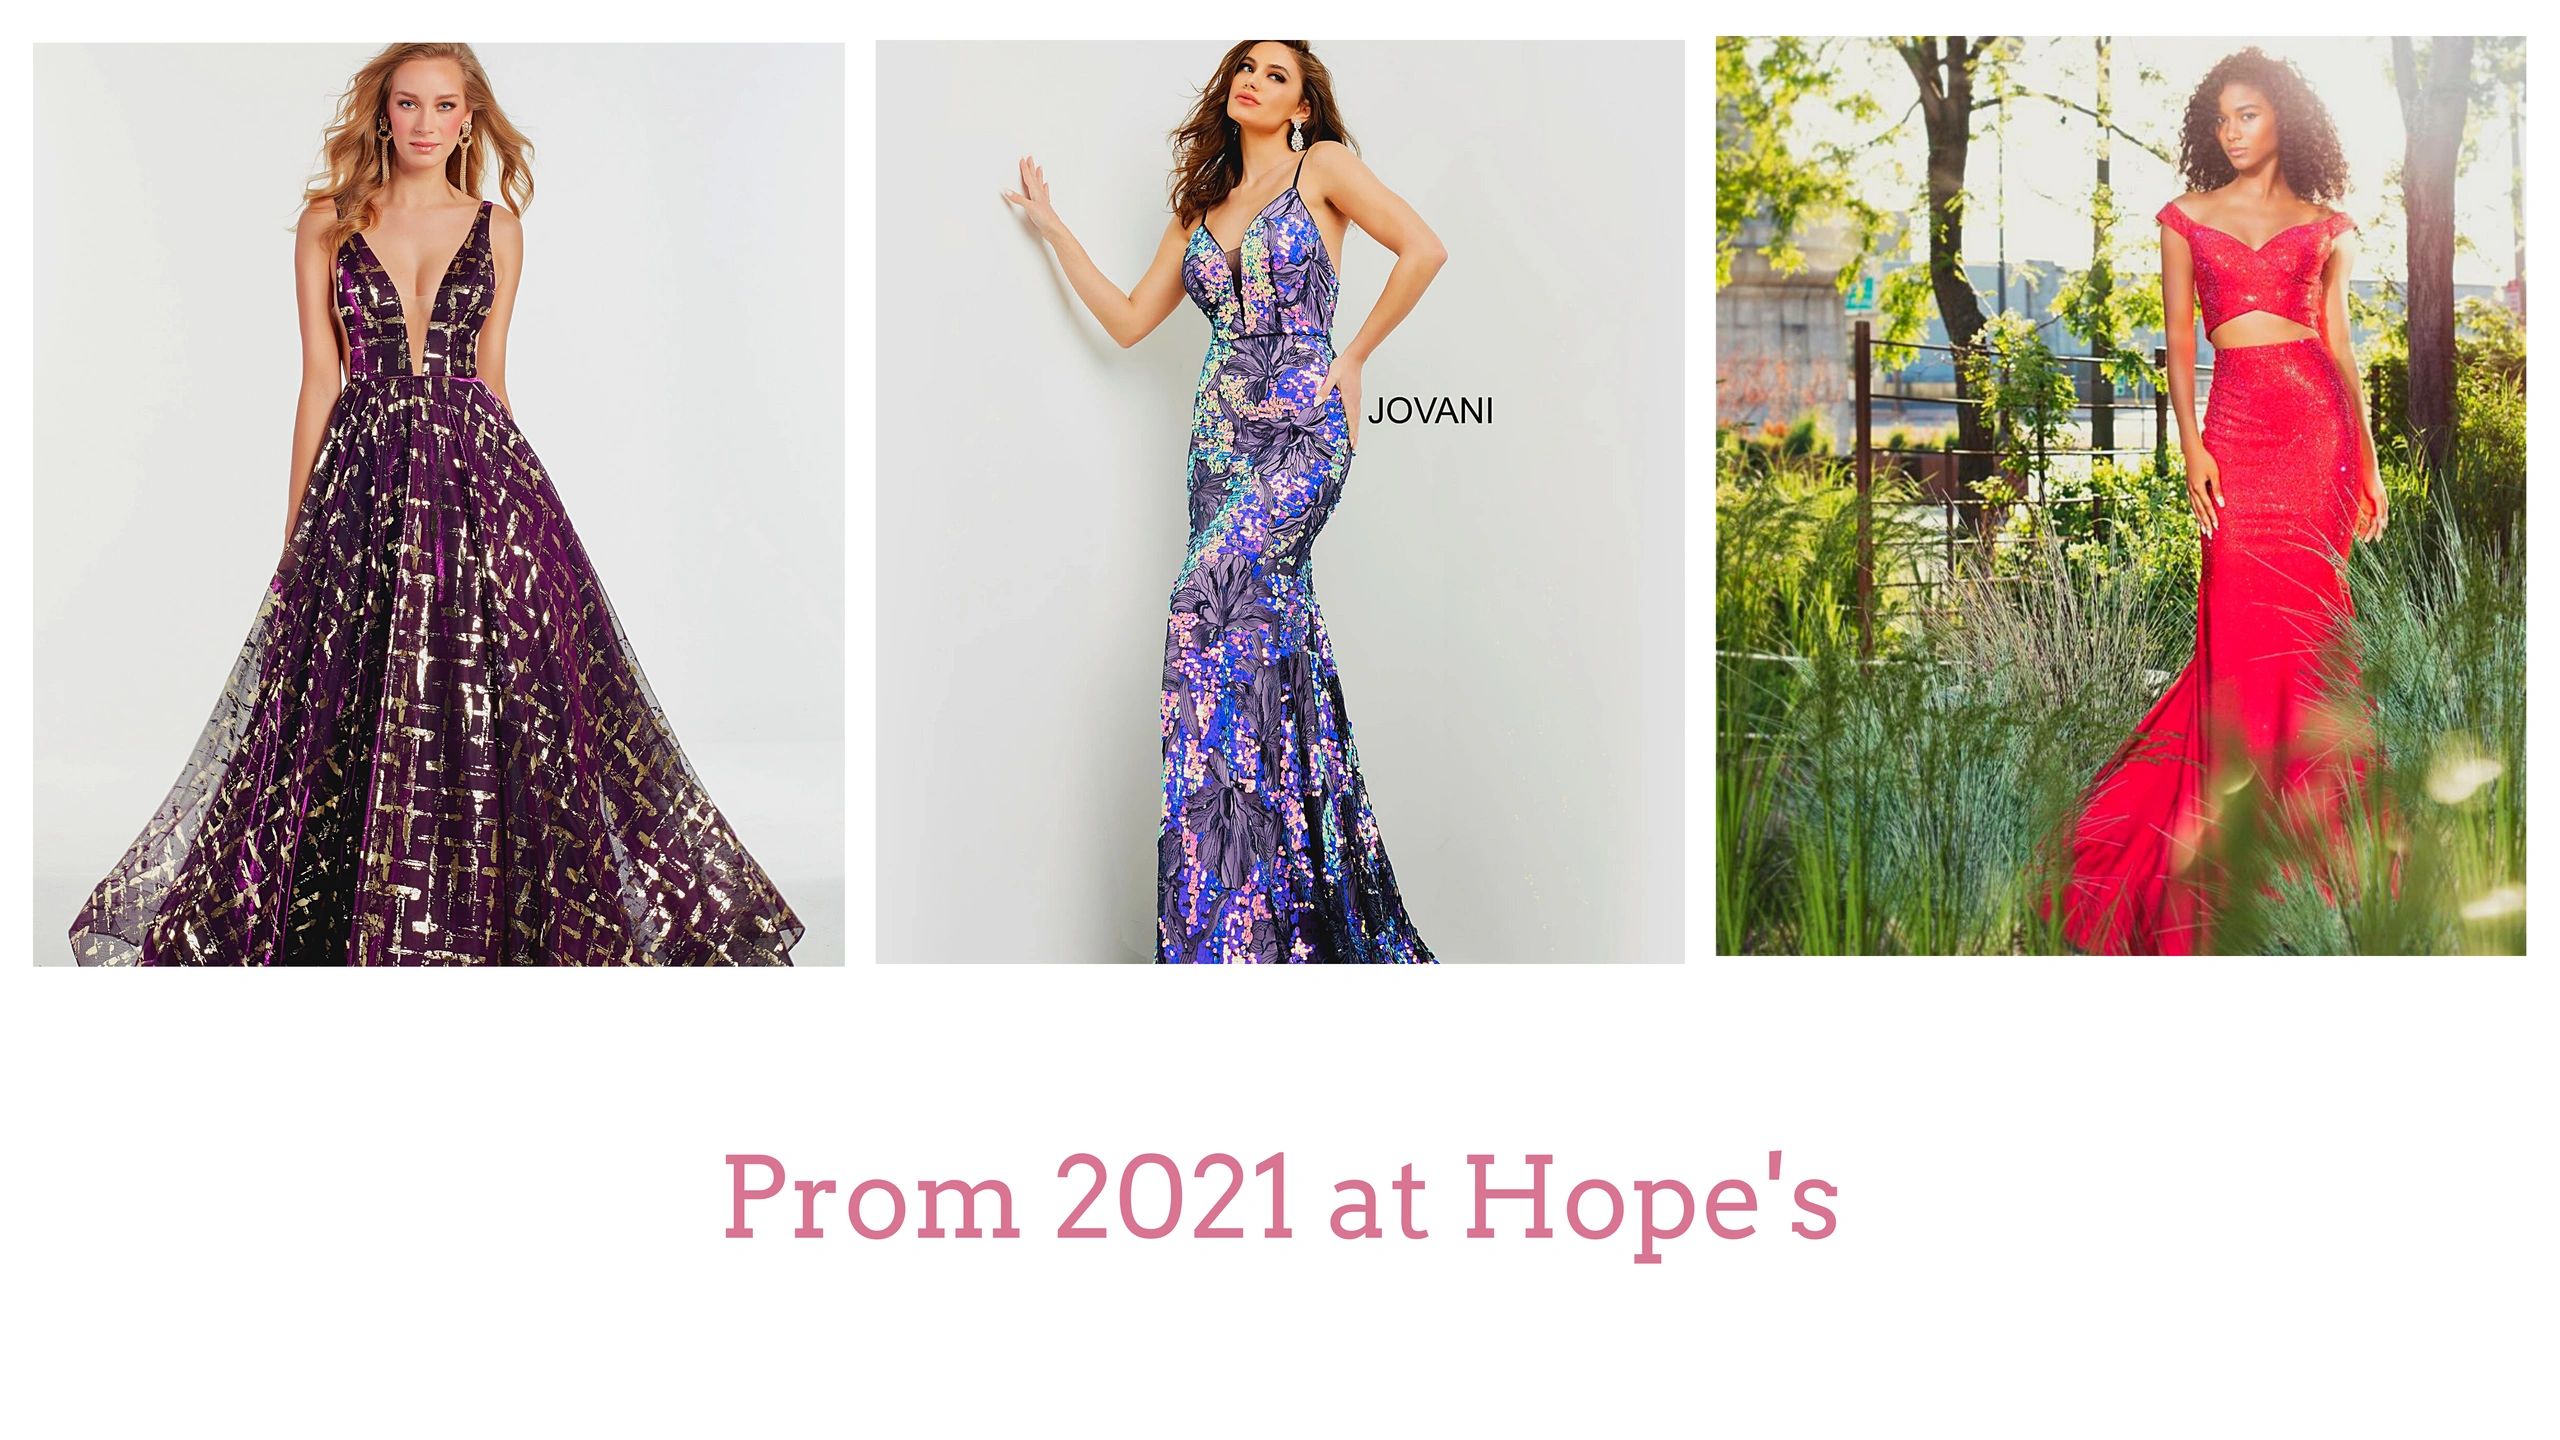 Prom 2021 at Hope's